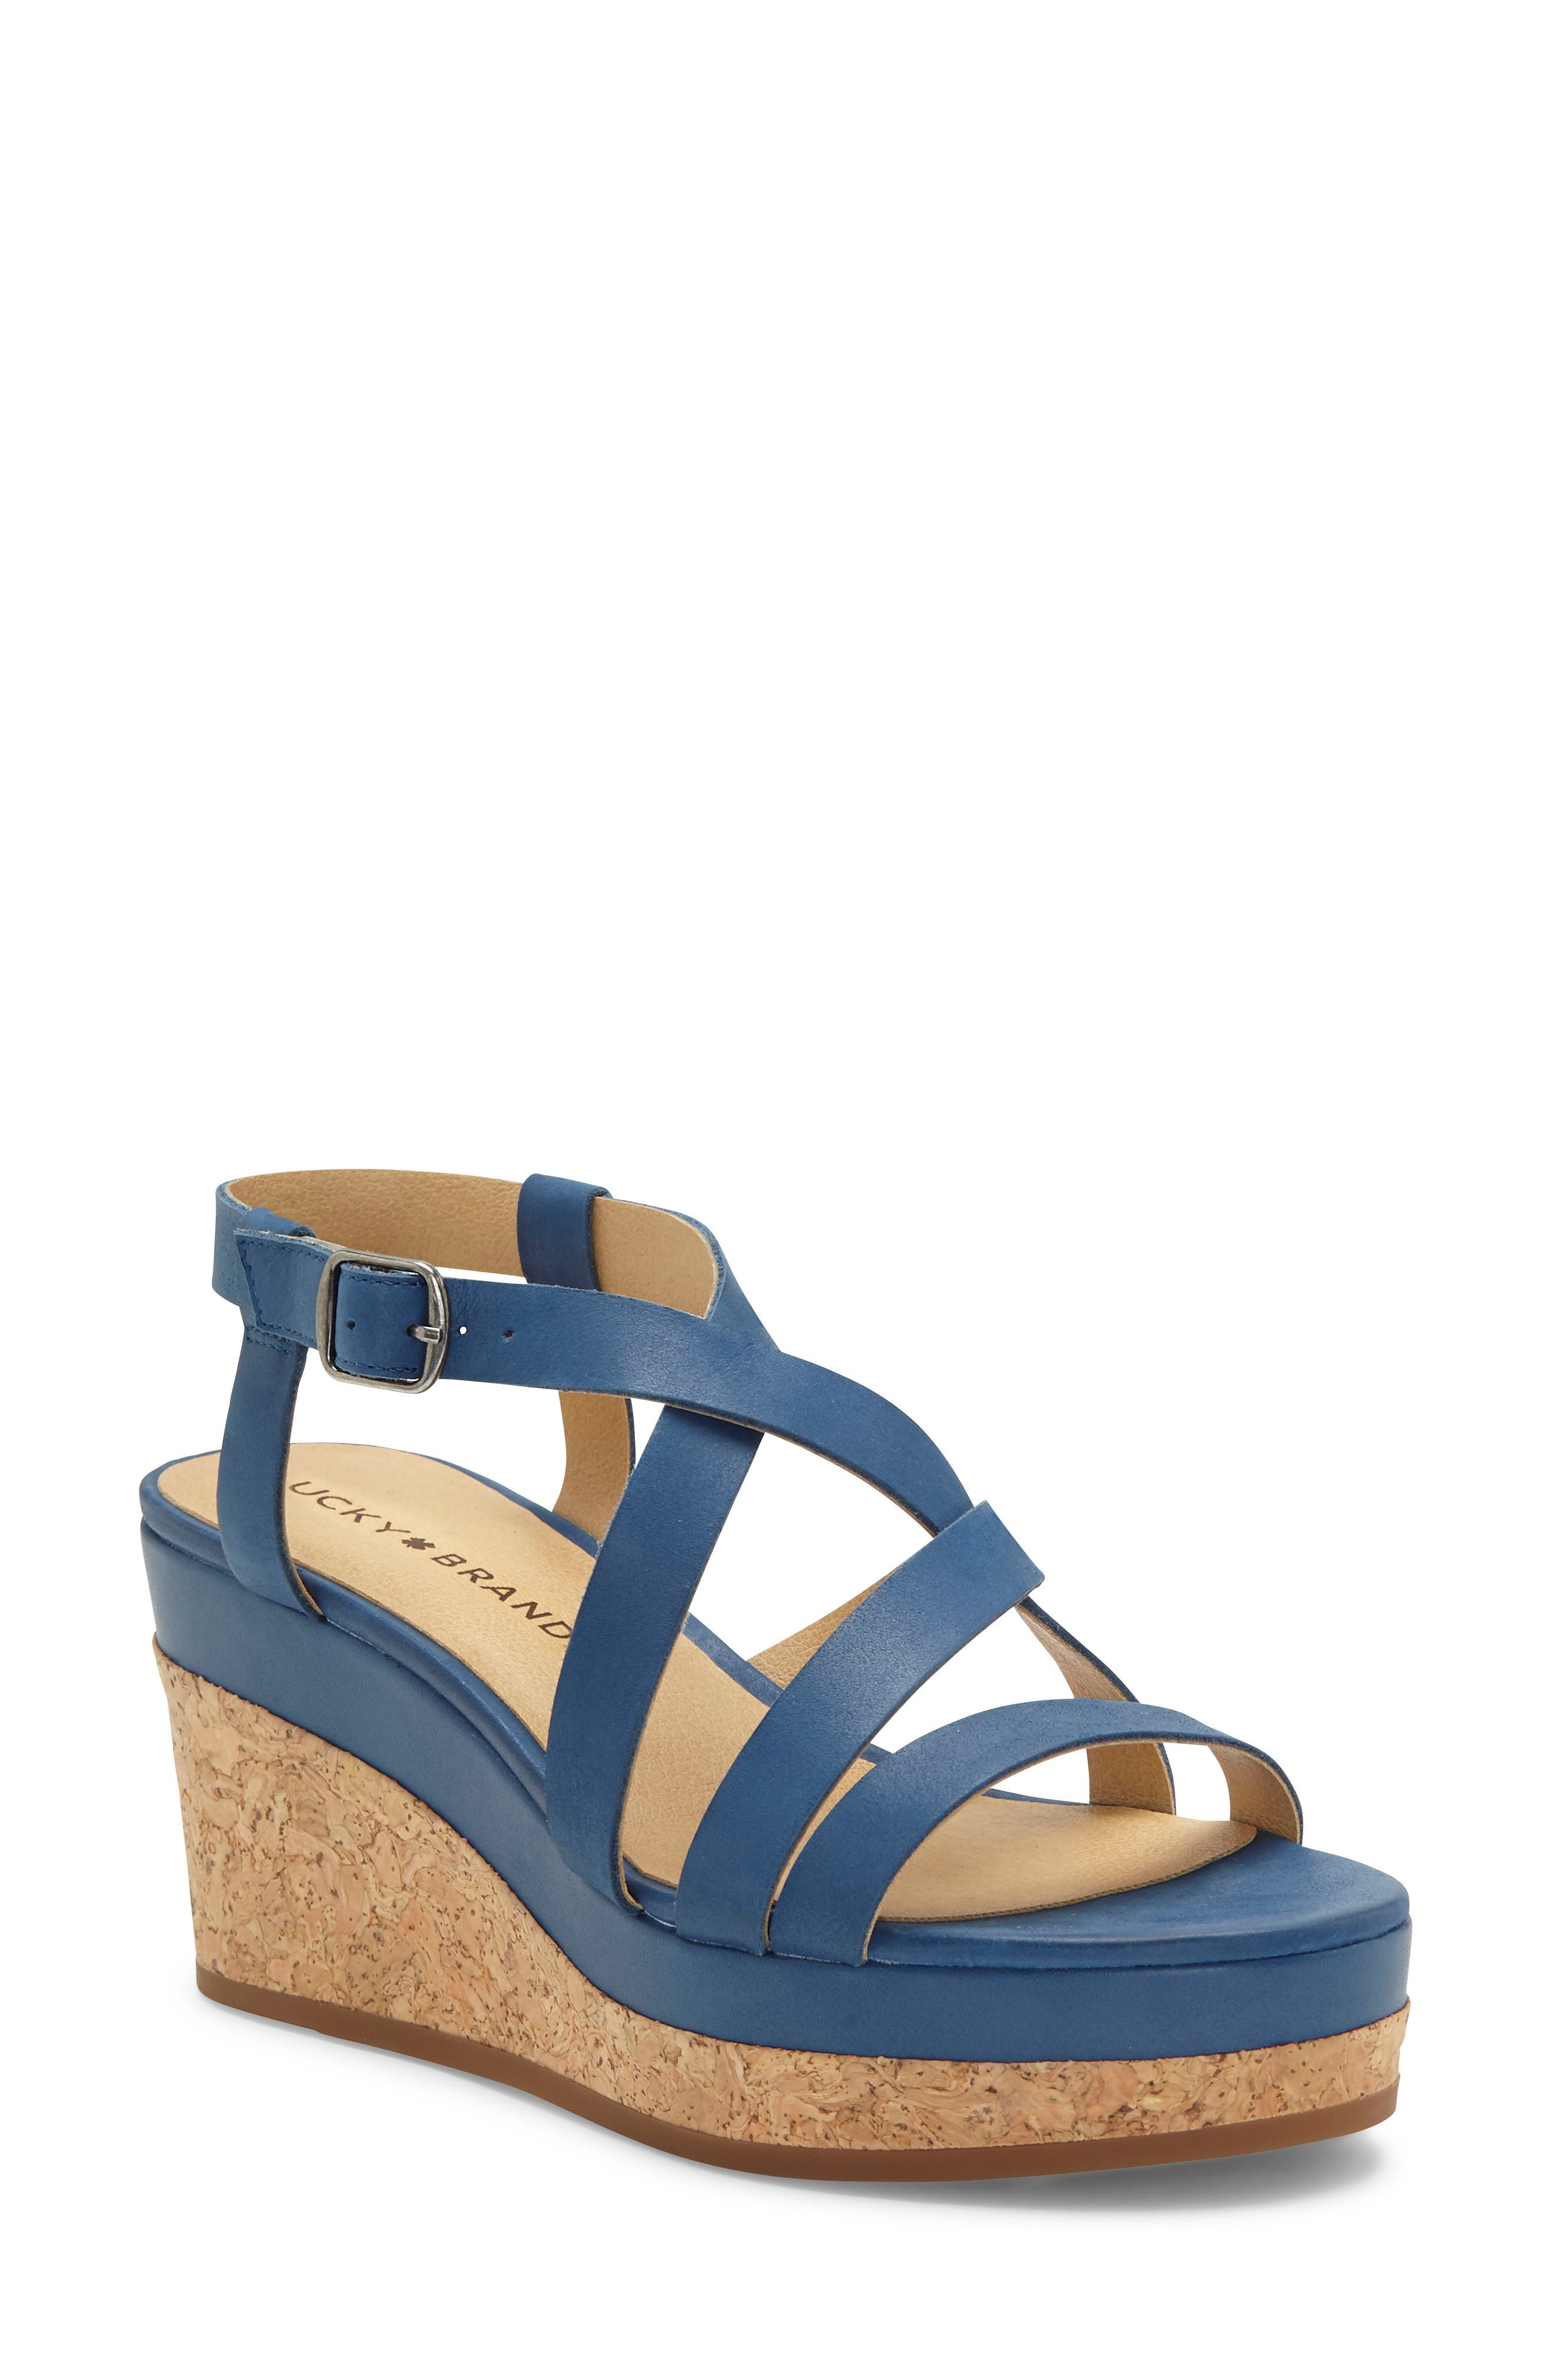 lucky brand navy wedges